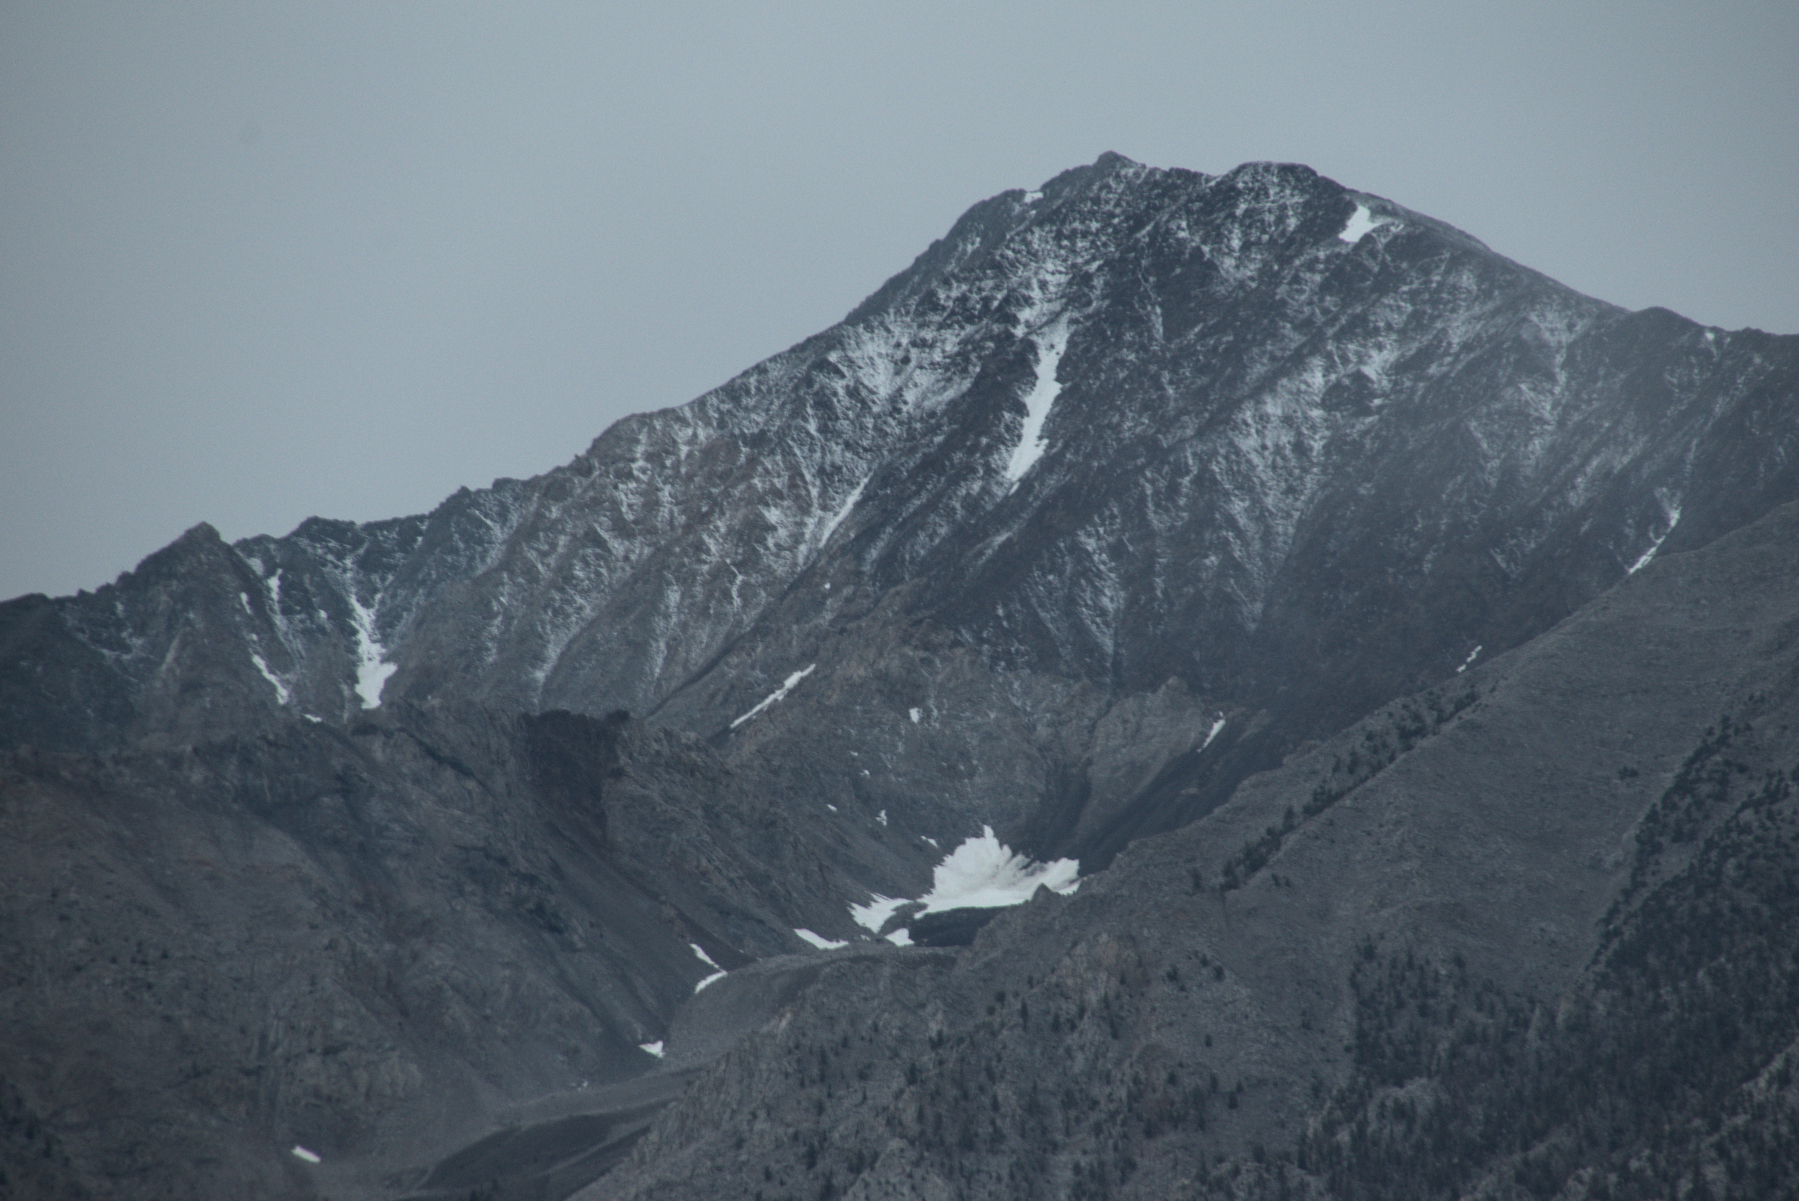 Mt Tom, tall, craggy, with a triangular peak, dark under cloudy skies, has a few large snow fields left at the beginning of fall, but those clouds also brought a light dusting of fresh snow.